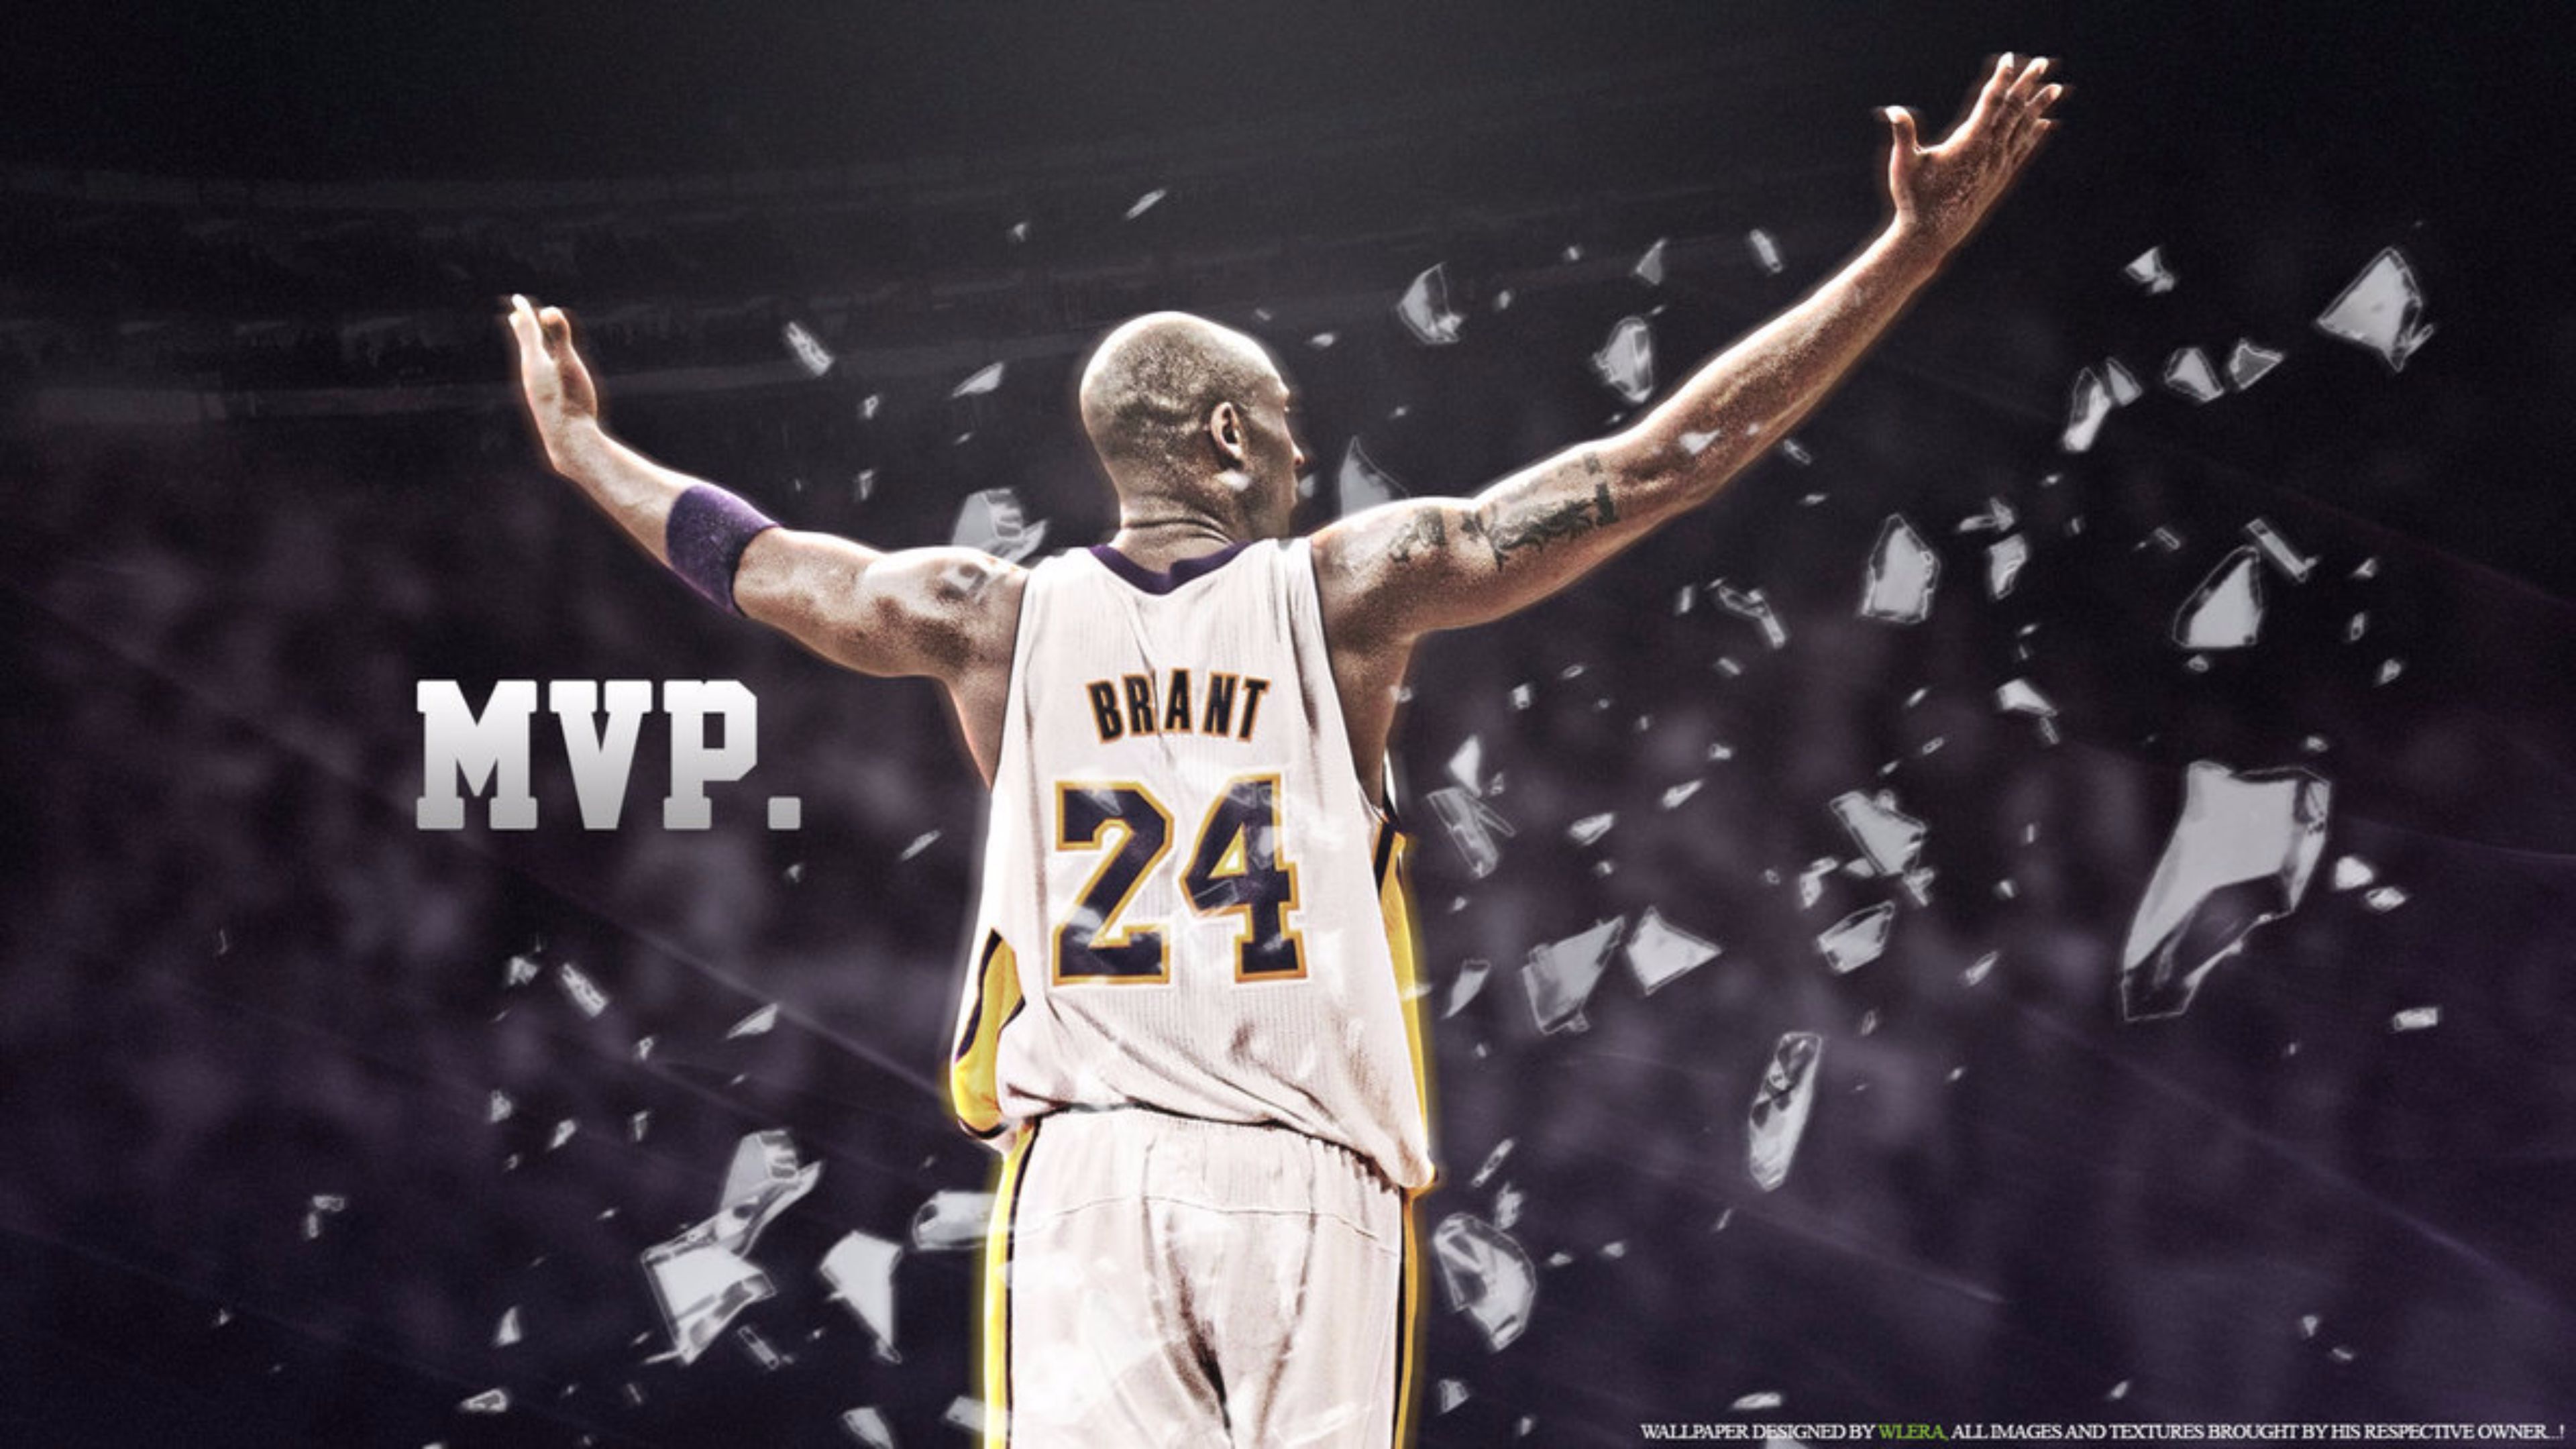 Kobe Bryant Cool Wallpapers for Phone, Background Wallpapers - HeroScreen